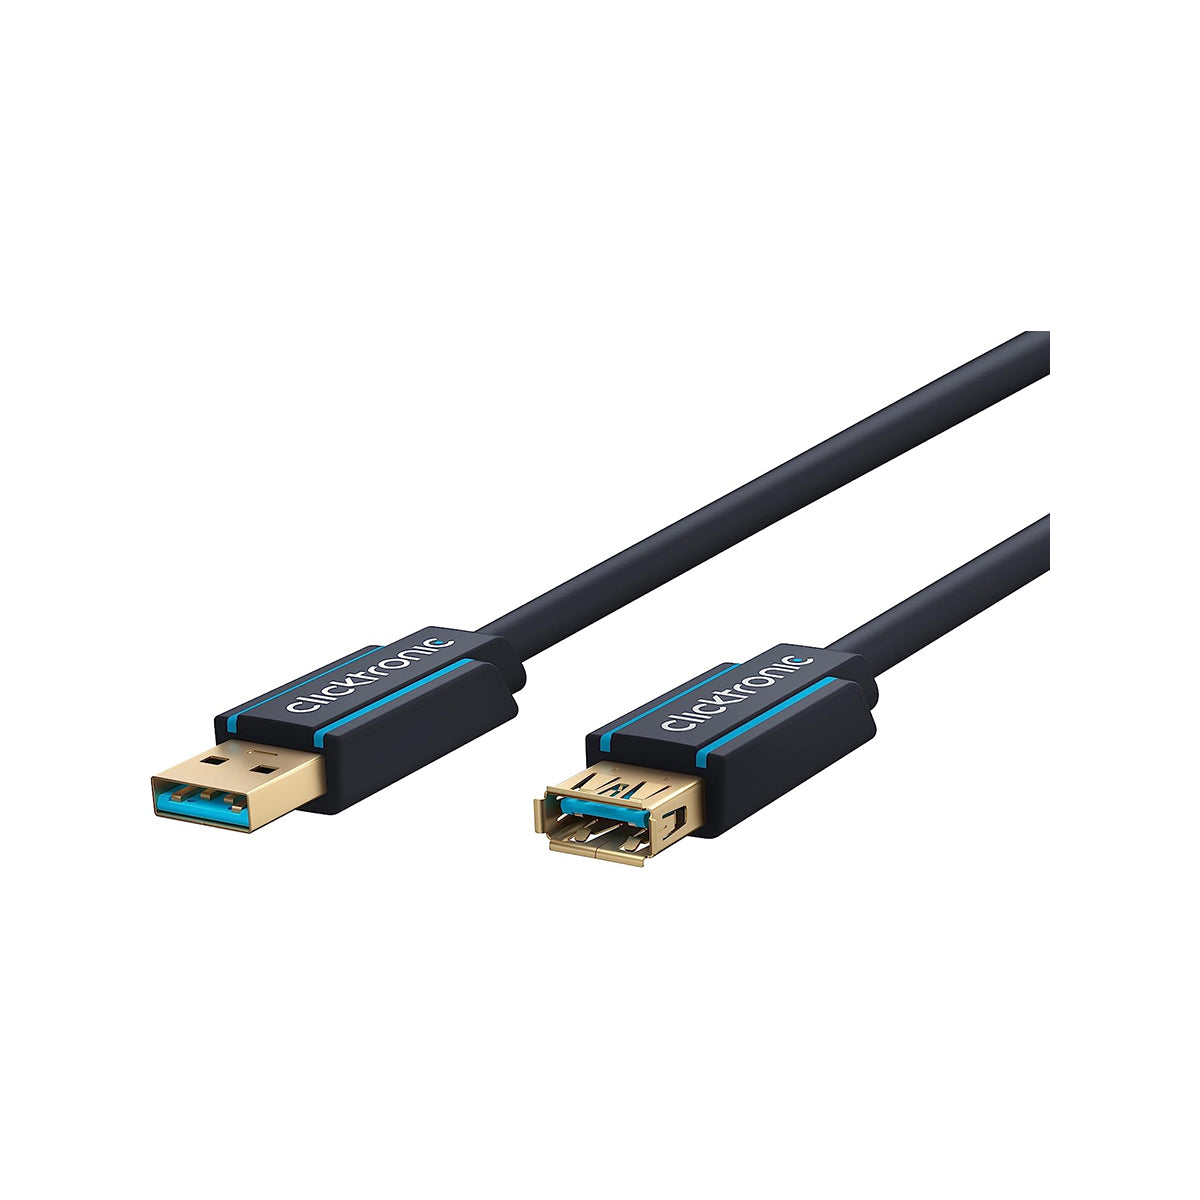 Clicktronic USB A Male to Female 3.0 Cable 1.8m